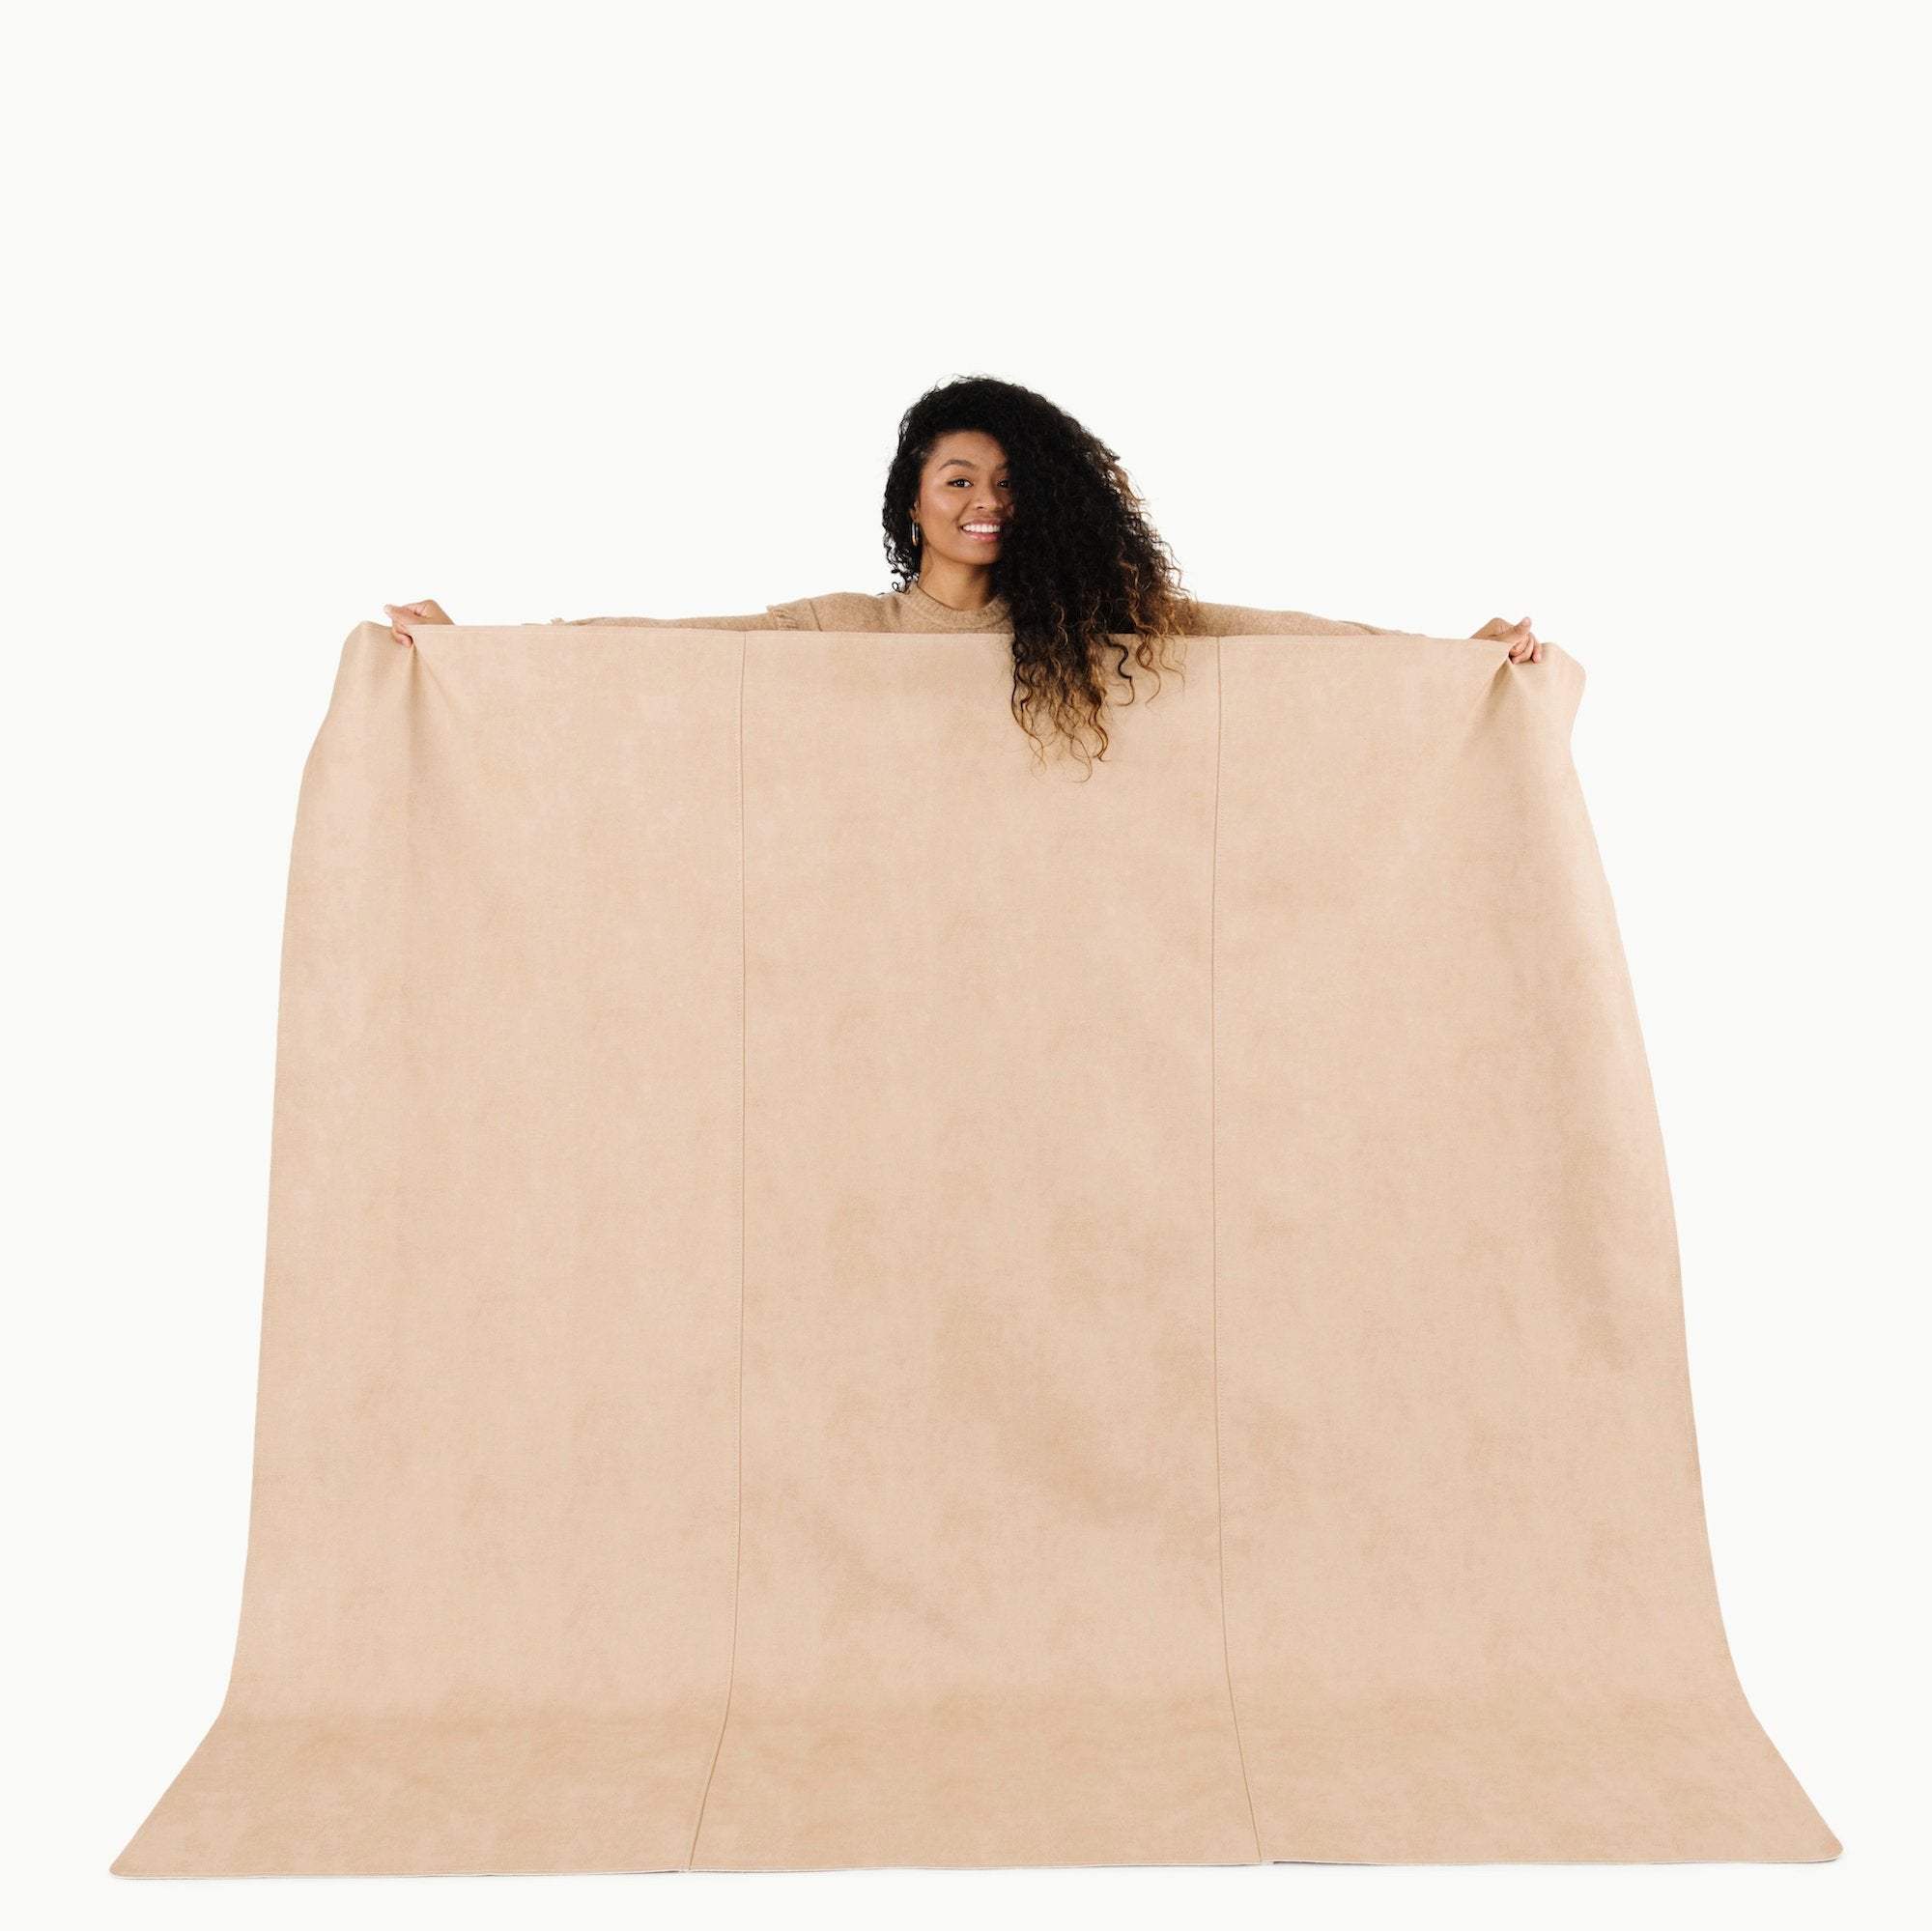 Untanned (on sale) / Square@Woman holding the Untanned Maxi Square Mat